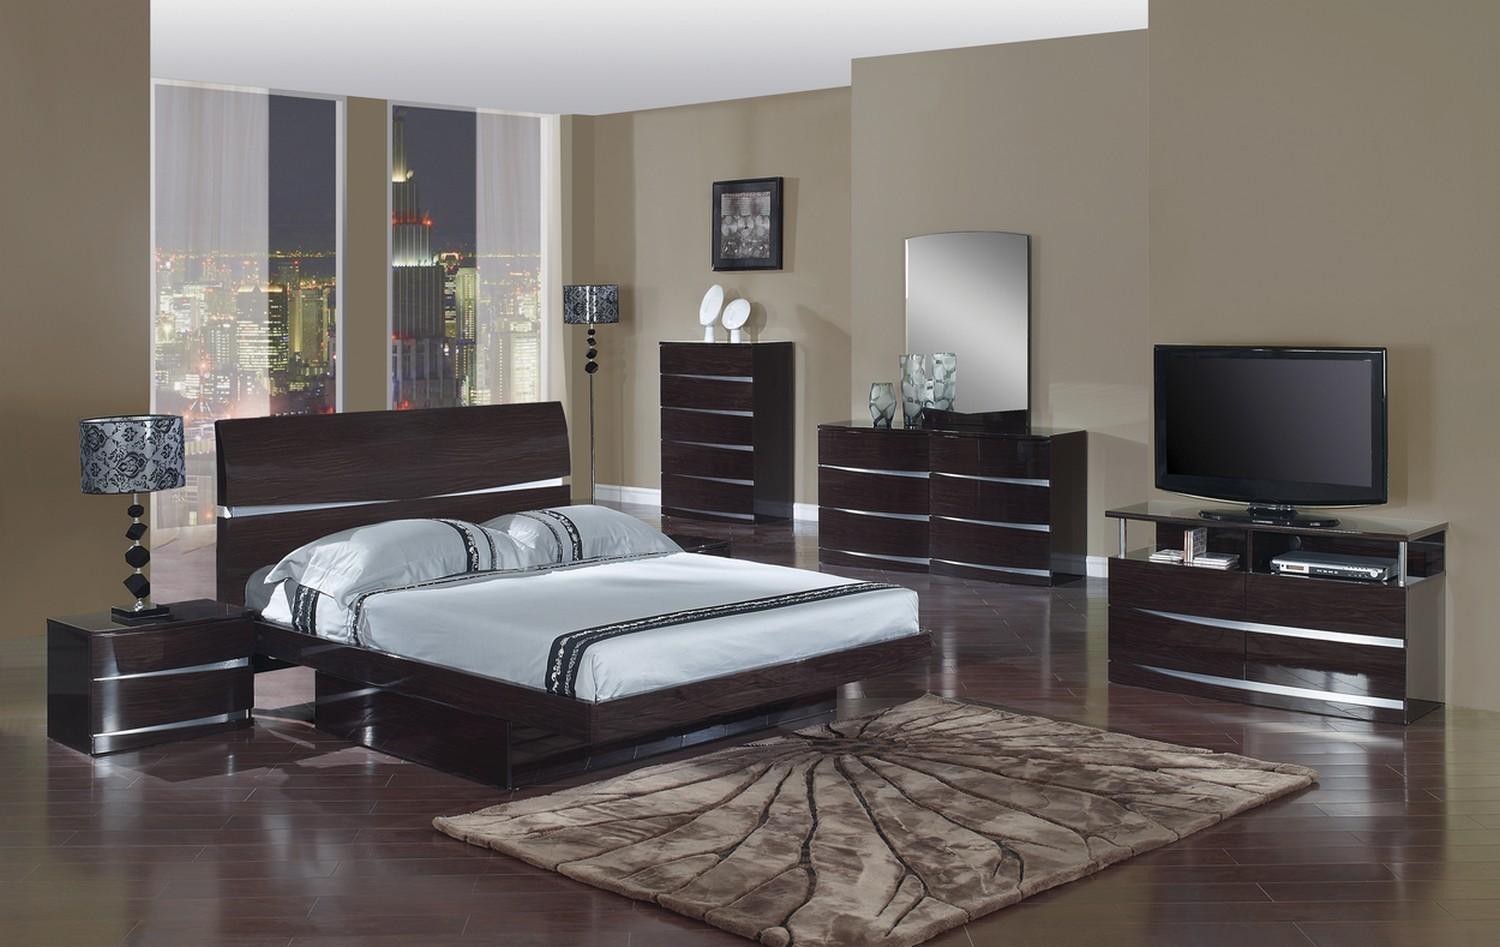 Contemporary, Modern Platform Bedroom Set Wynn WYNN-BED-WENGE-Q-5-PC in Wenge, Silver Lacquer